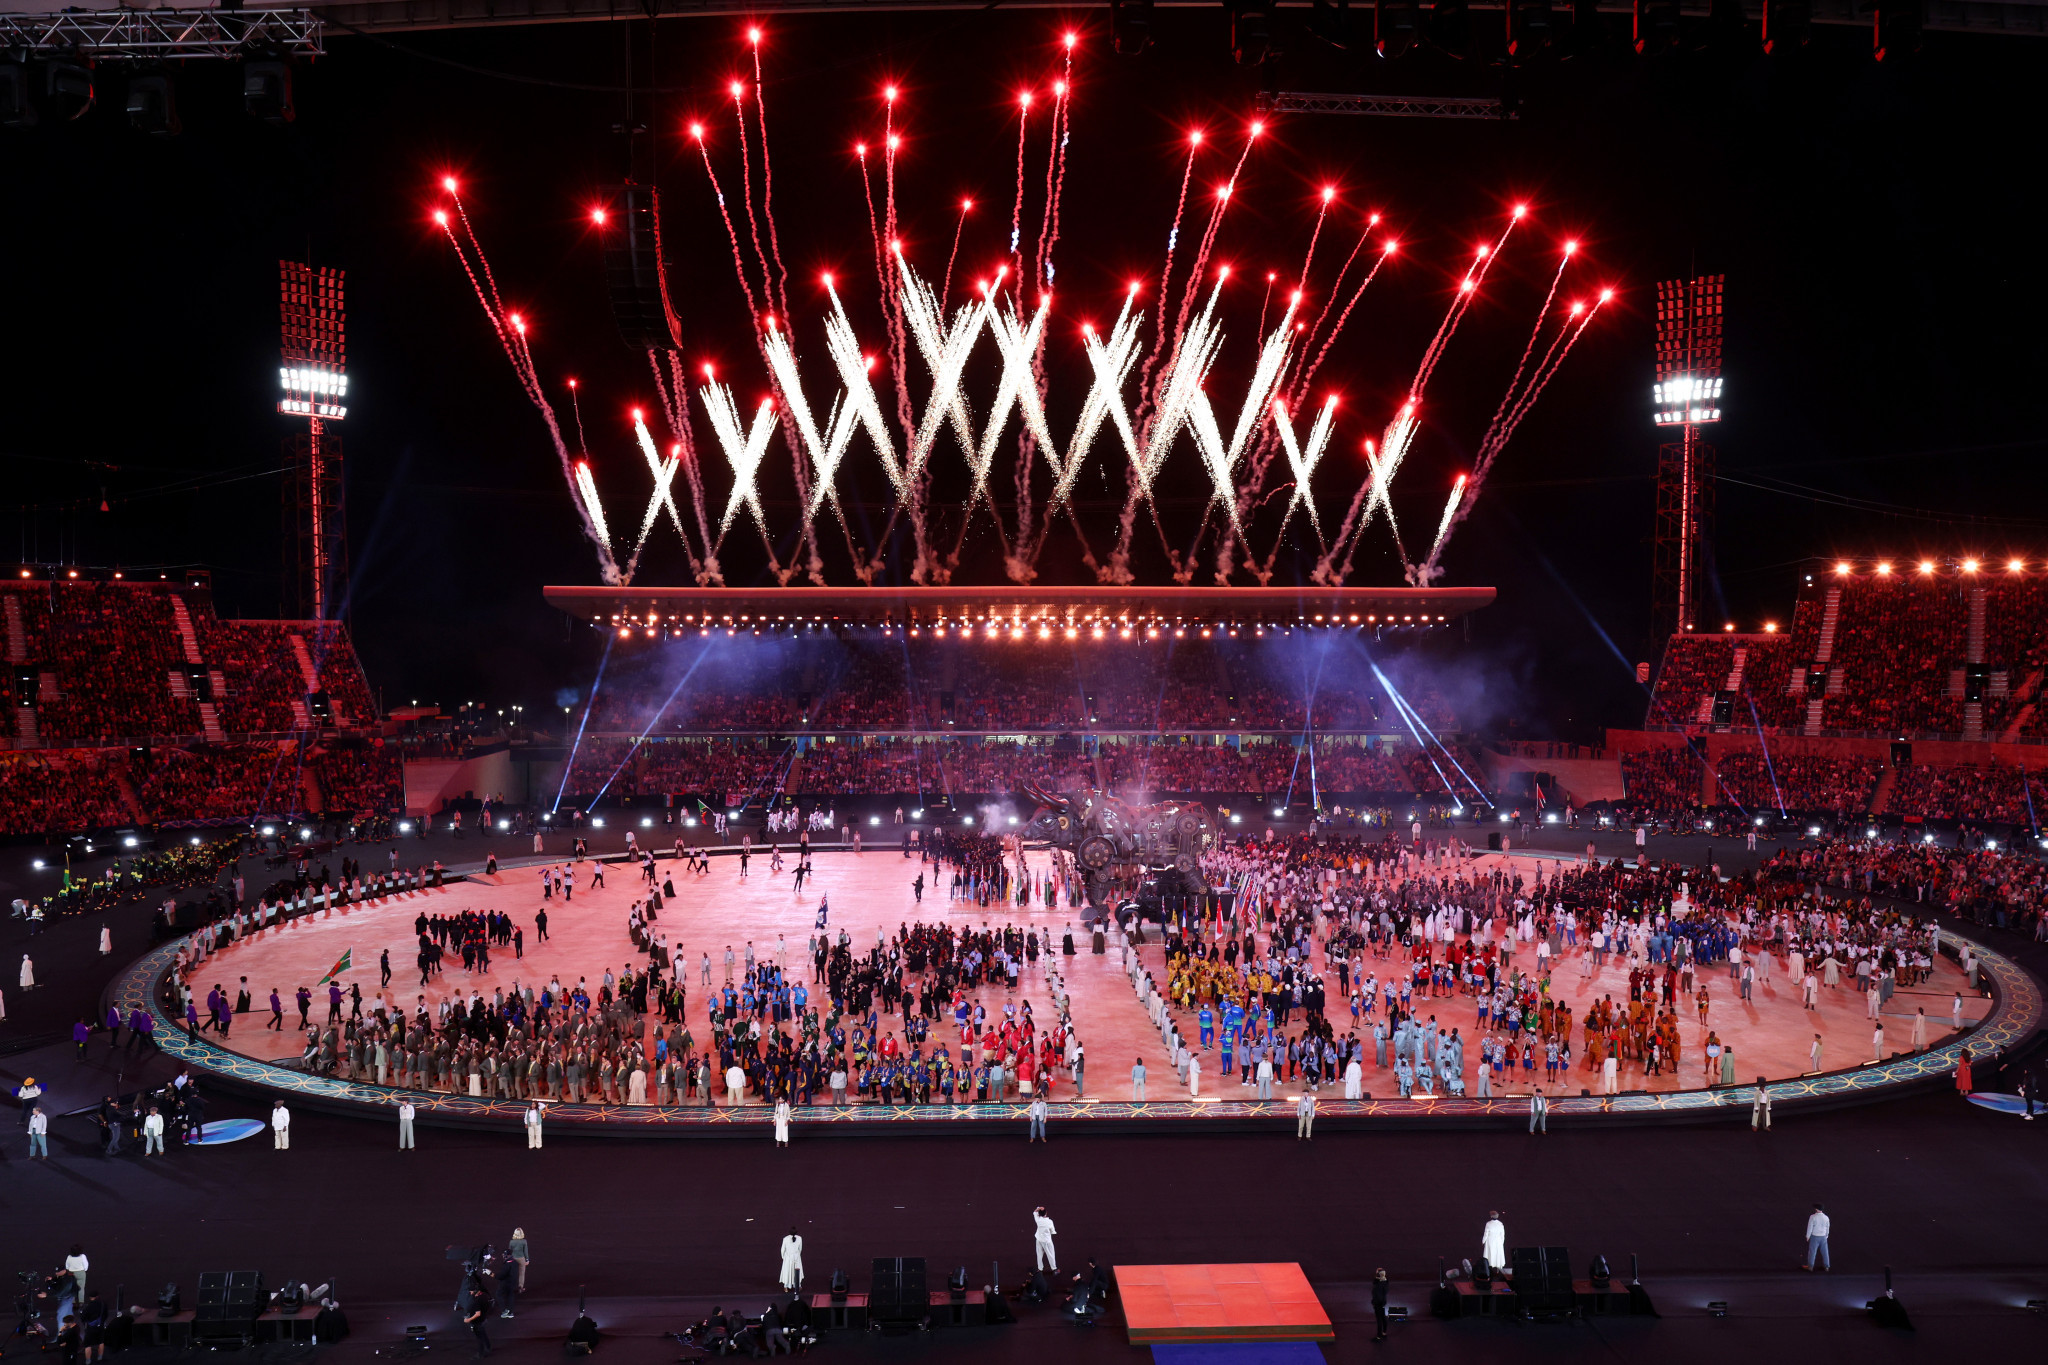 Mick Hogan praised the impact the Birmingham 2022 Opening Ceremony had on ticket sales for the multi-sport event ©Getty Images